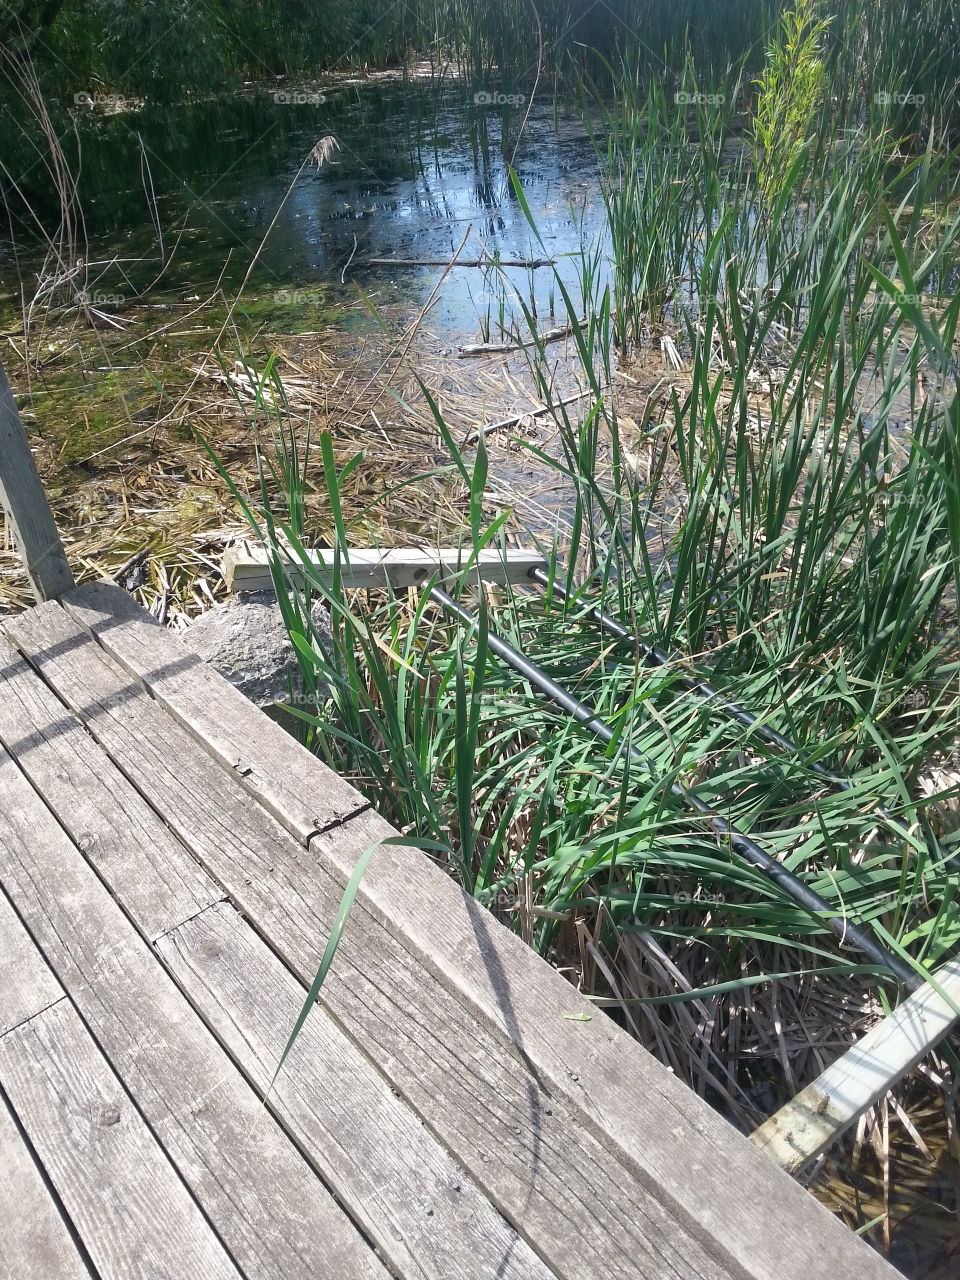 Nature, Grass, Wood, Water, No Person